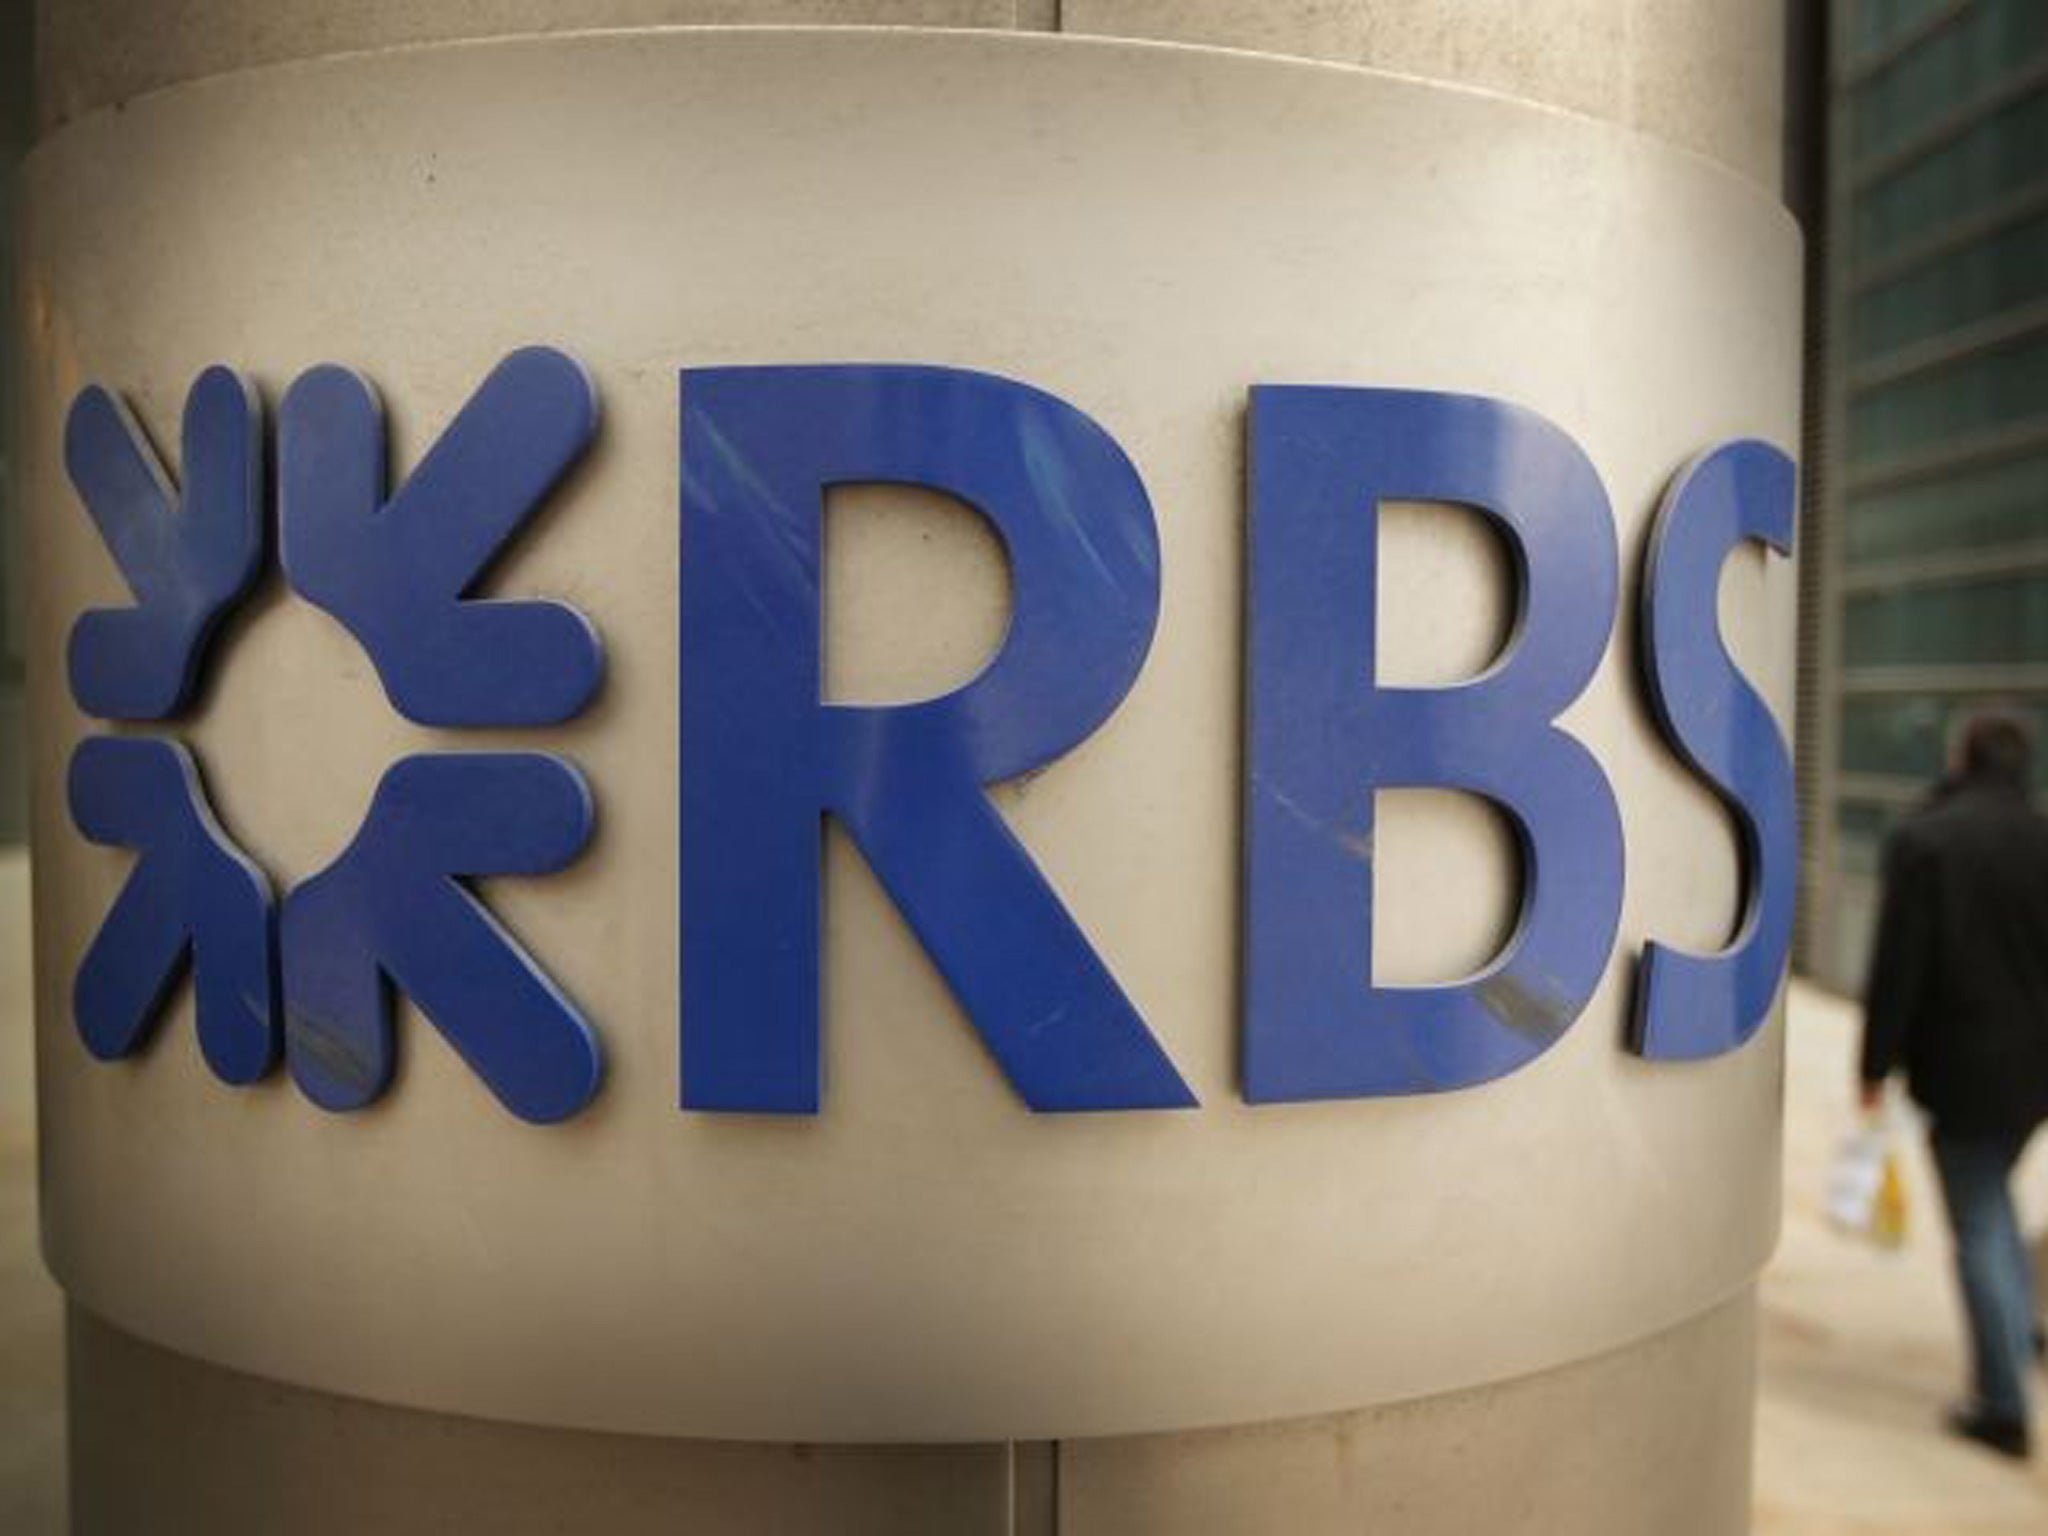 RBS was one of six major international banks fined a combined £2.6 billion last month for failing to stop traders rigging the foreign exchange markets